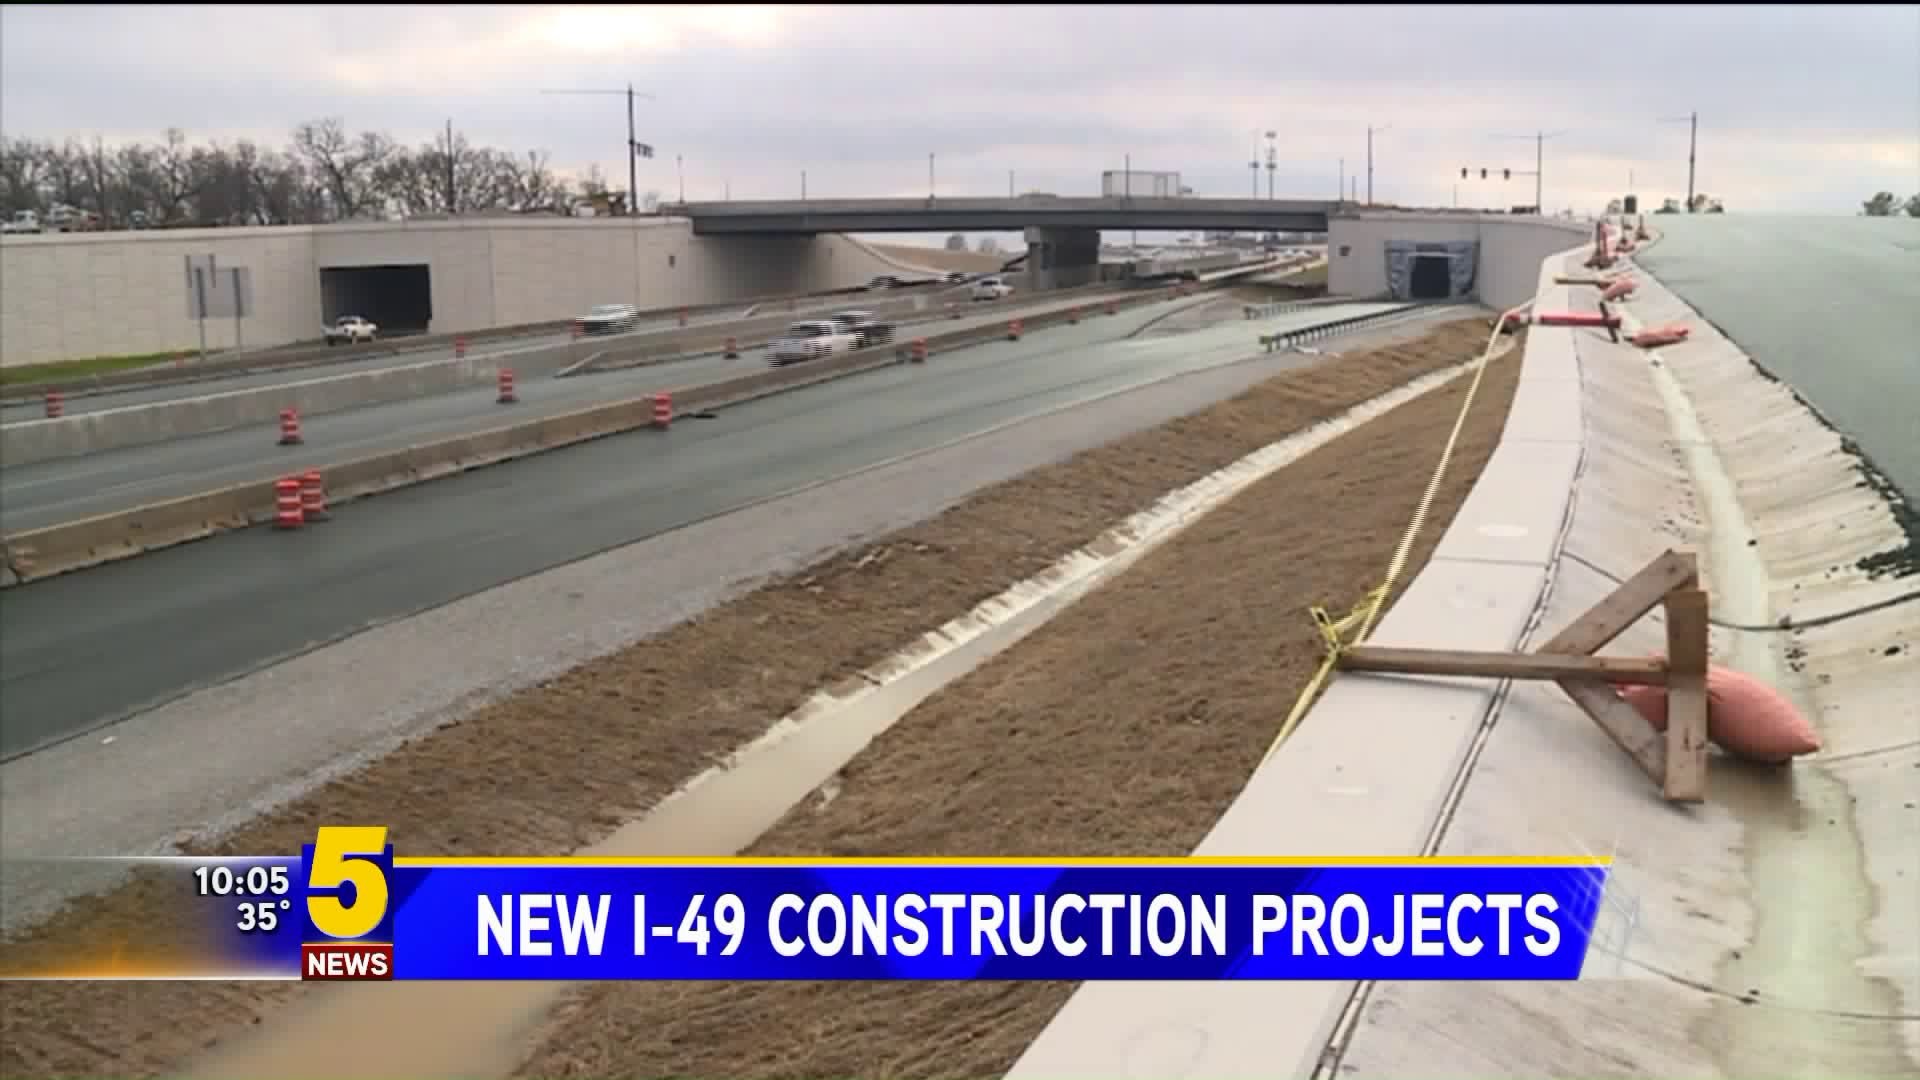 New I-49 Construction Projects